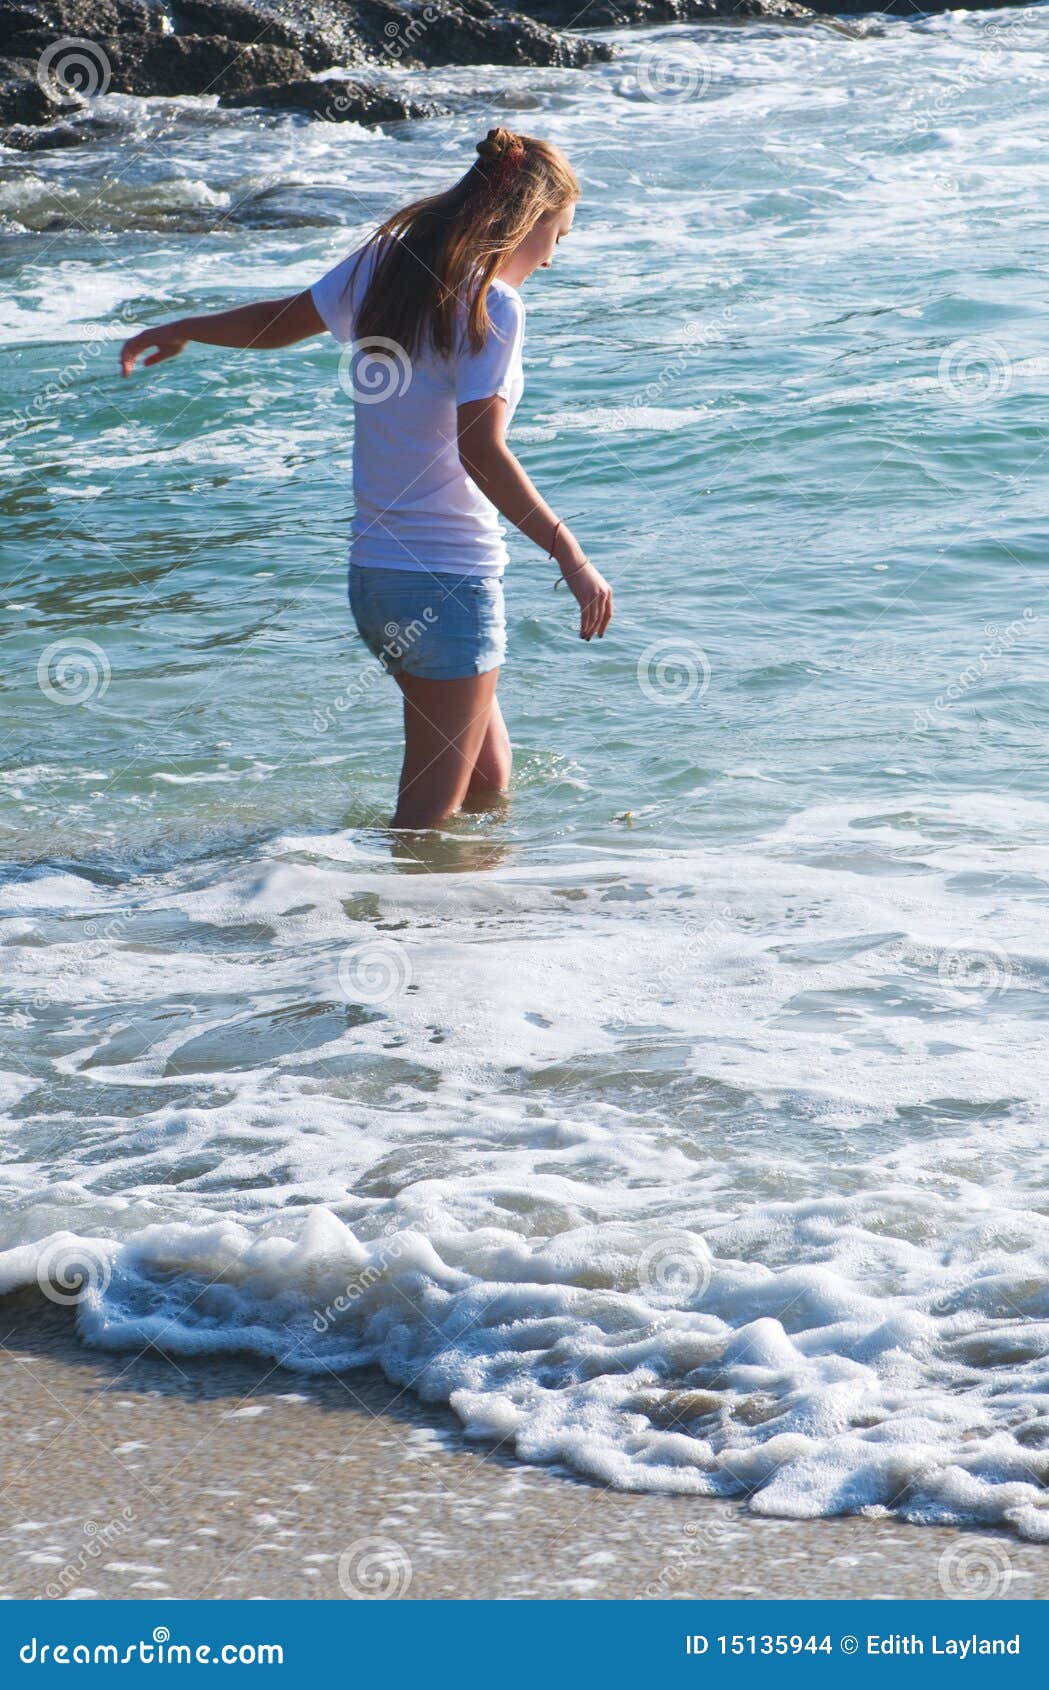 Wading in the Water stock photo. Image of ocean, woman - 15135944